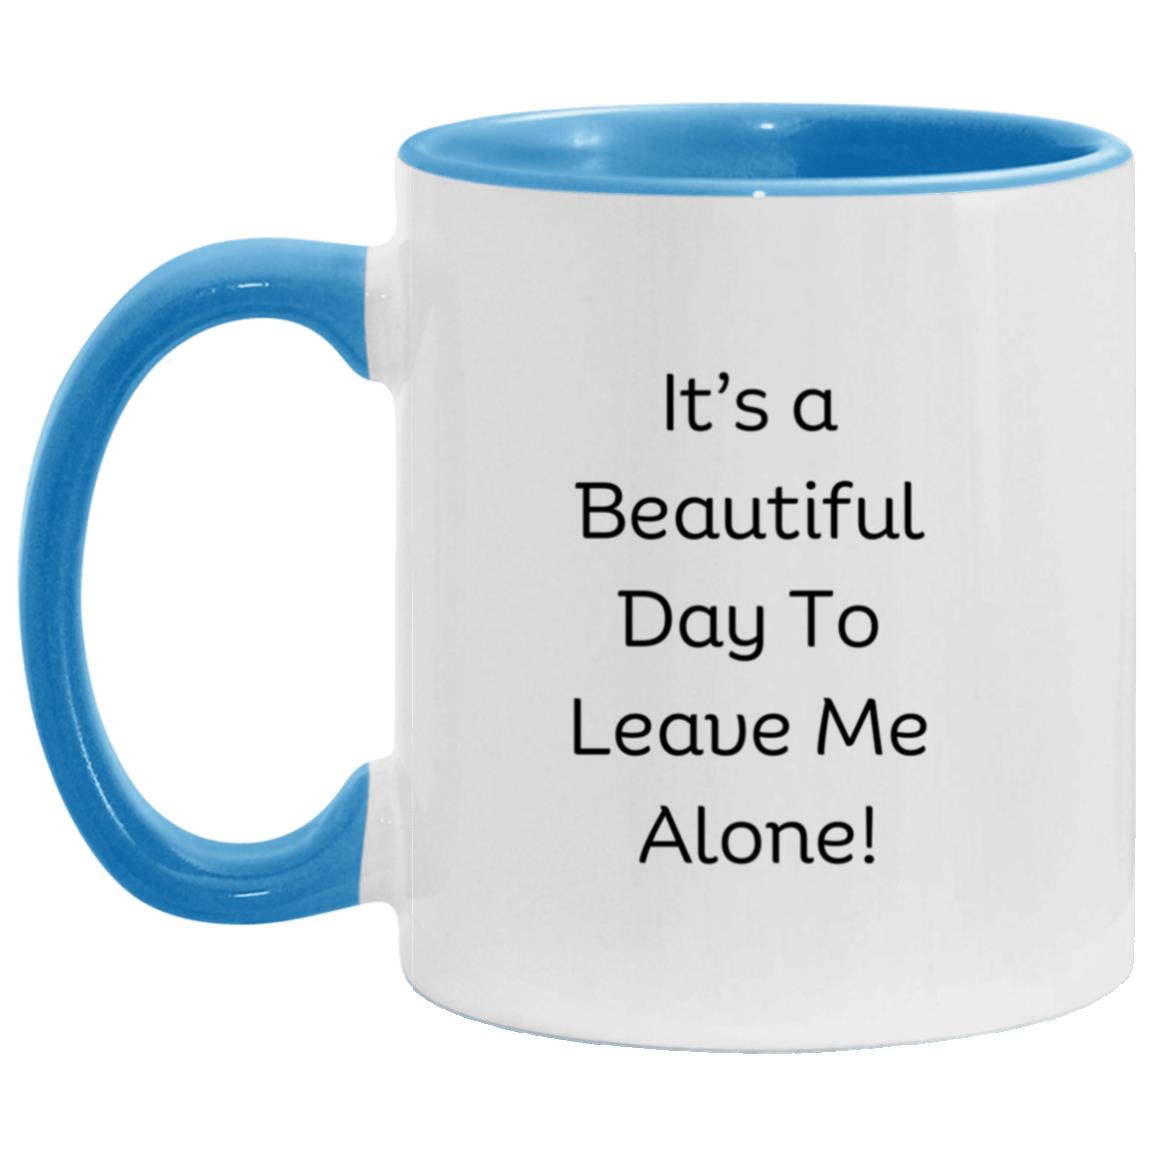 It's a beautiful day to leave me alone Mug | Mother's Day Gift| For Mom| Partner| Girlfriend| Wife| Trending| Co-Worker